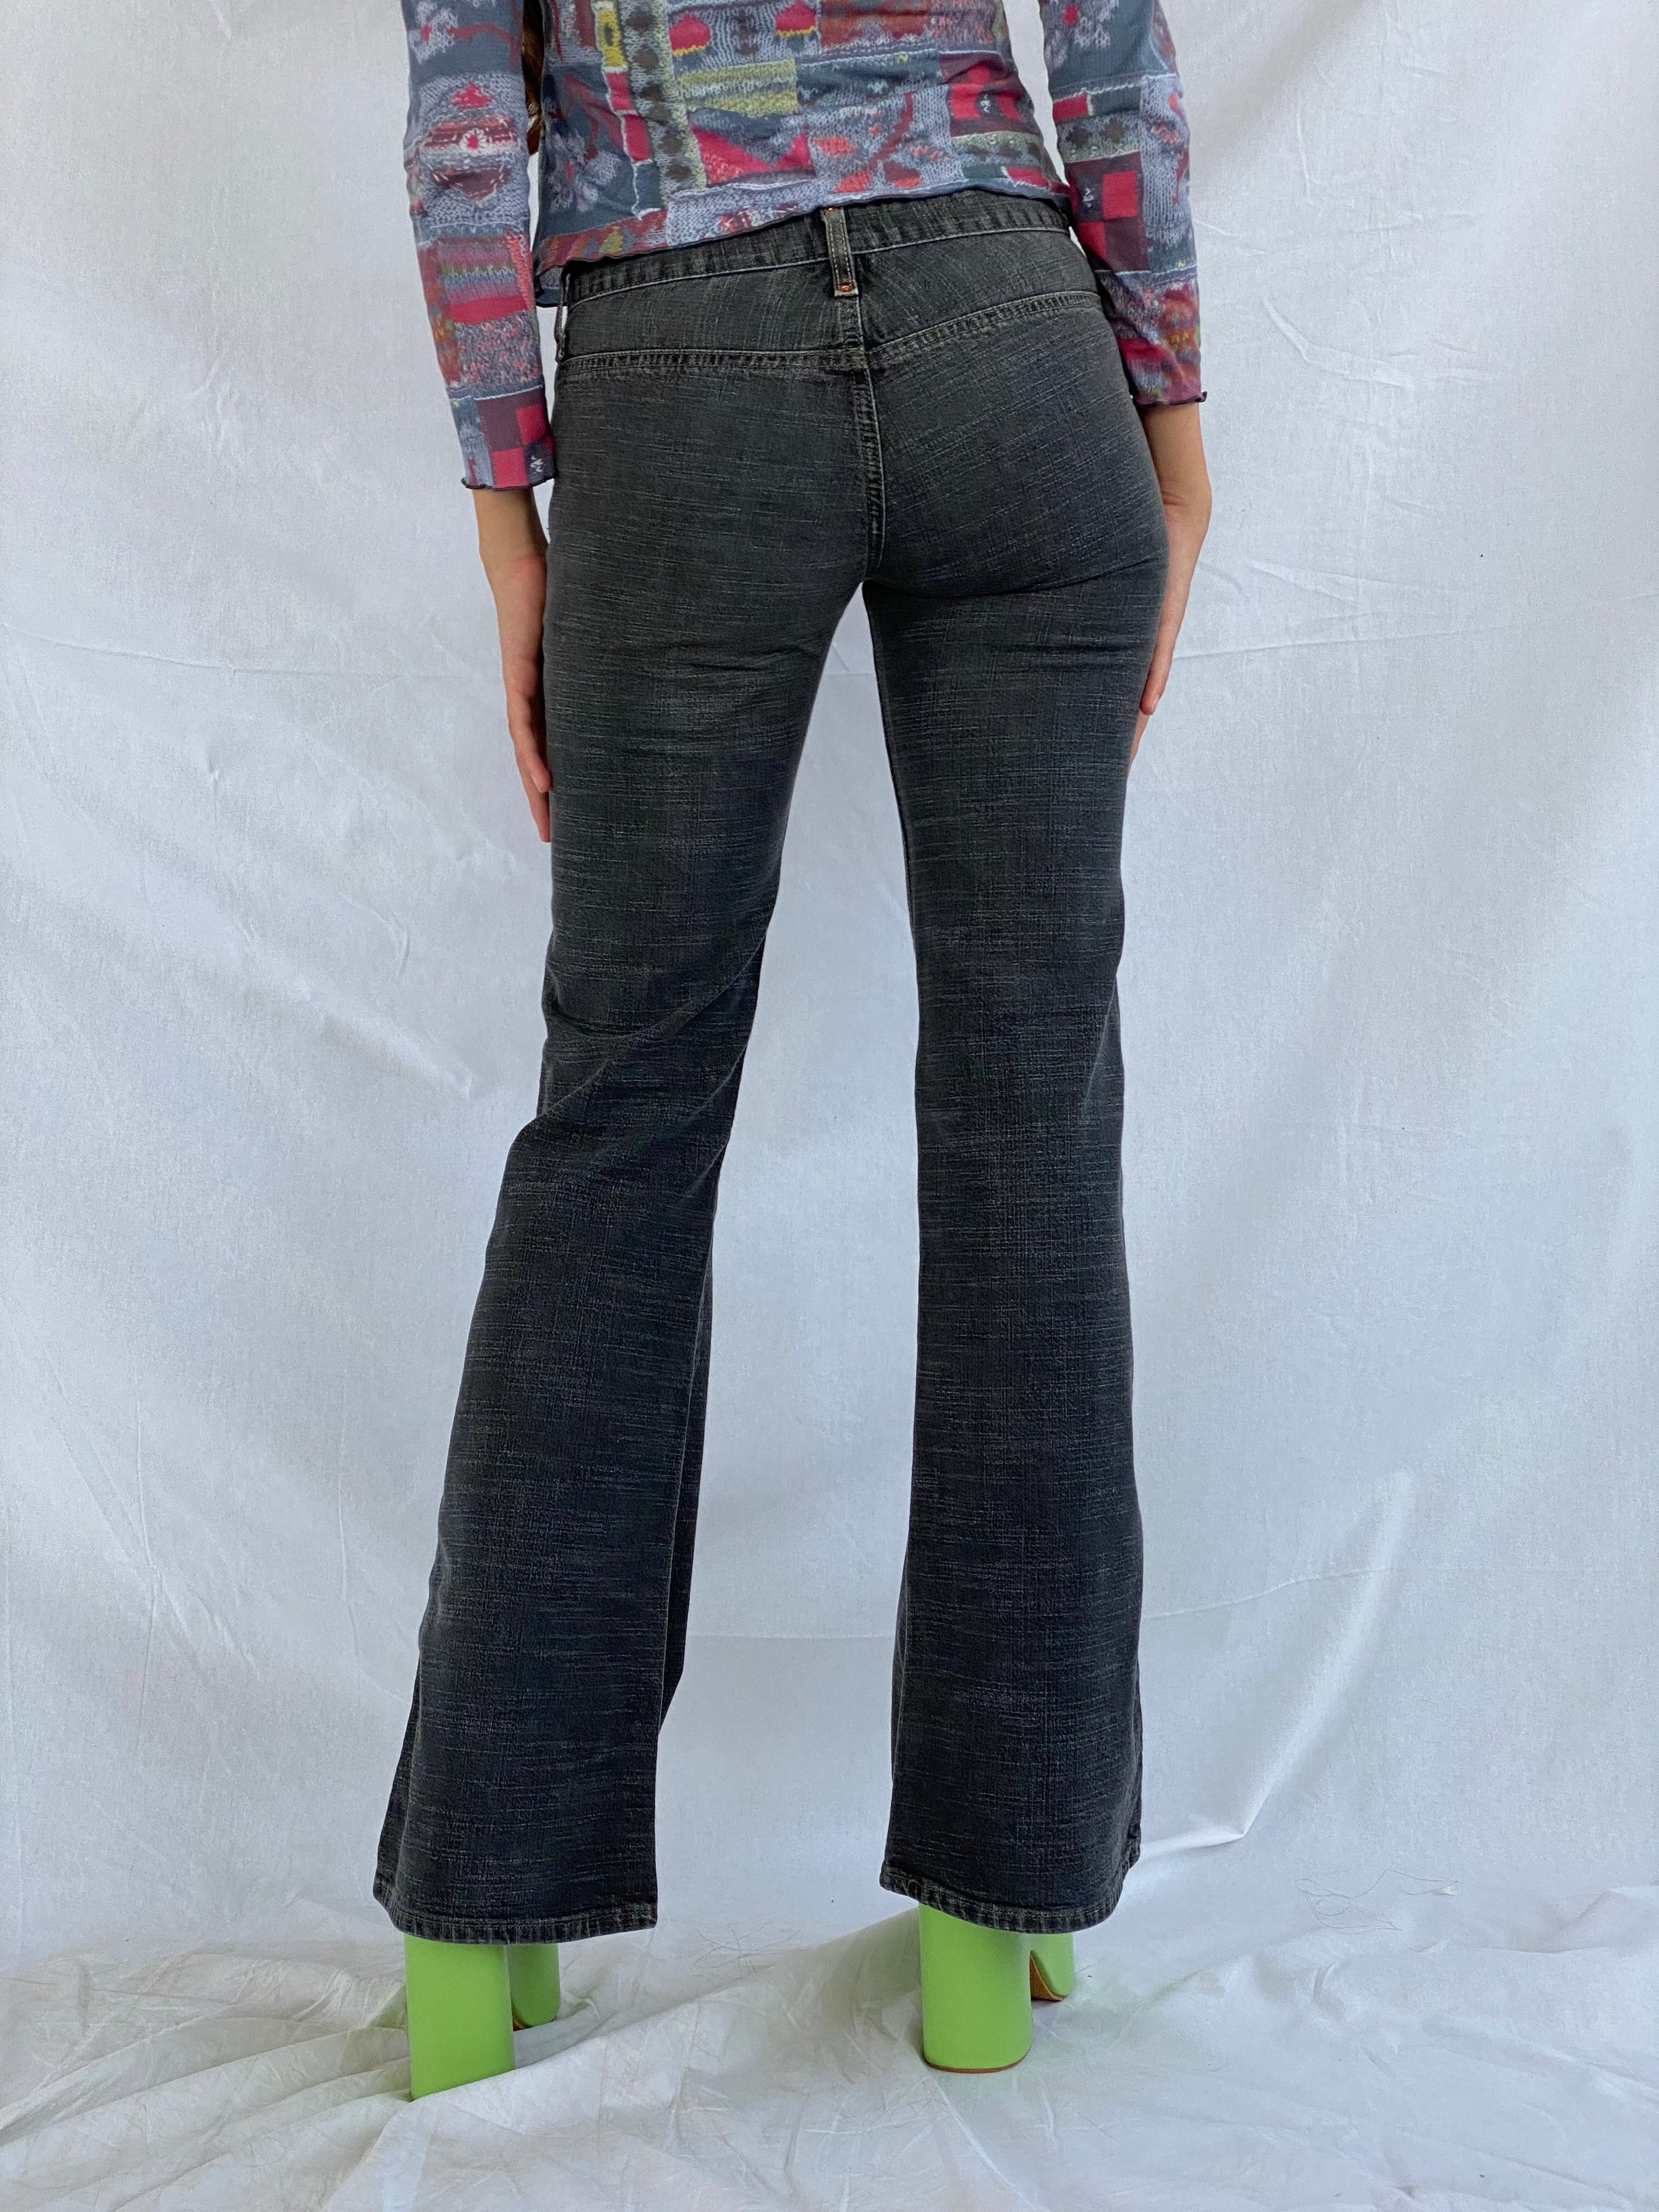 Vintage Low Waisted Levi’s Flare Jeans - Balagan Vintage Jeans flare, flare jeans, levis, levis jeans, low rise jeans, vintage levis